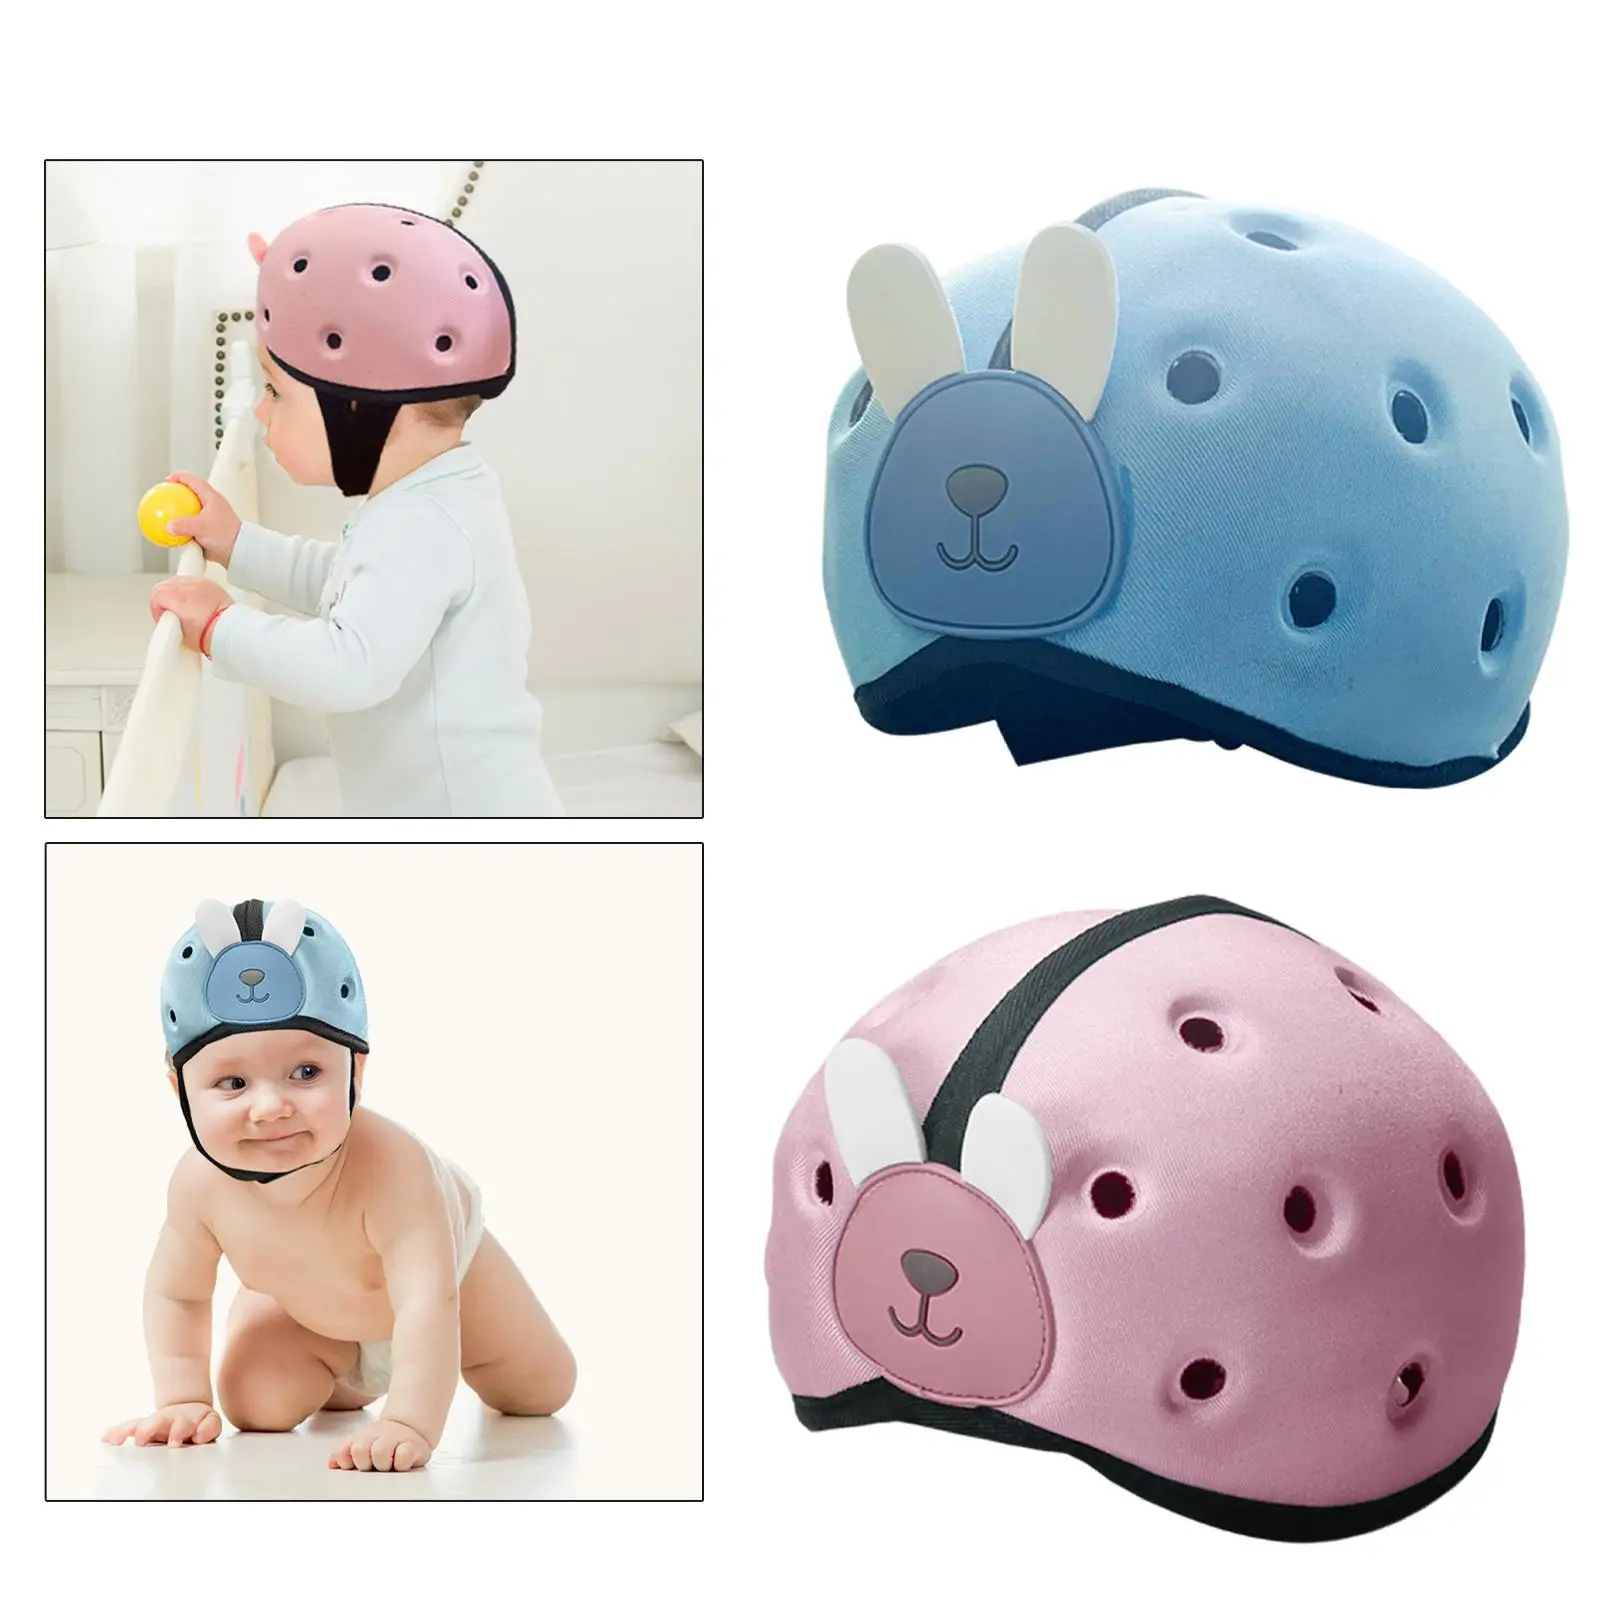 Baby Soft Protective , Breathable, Anti-, Harness, Beanie, Baby Head Guard, Head Guard for Kids, Toddlers, Running